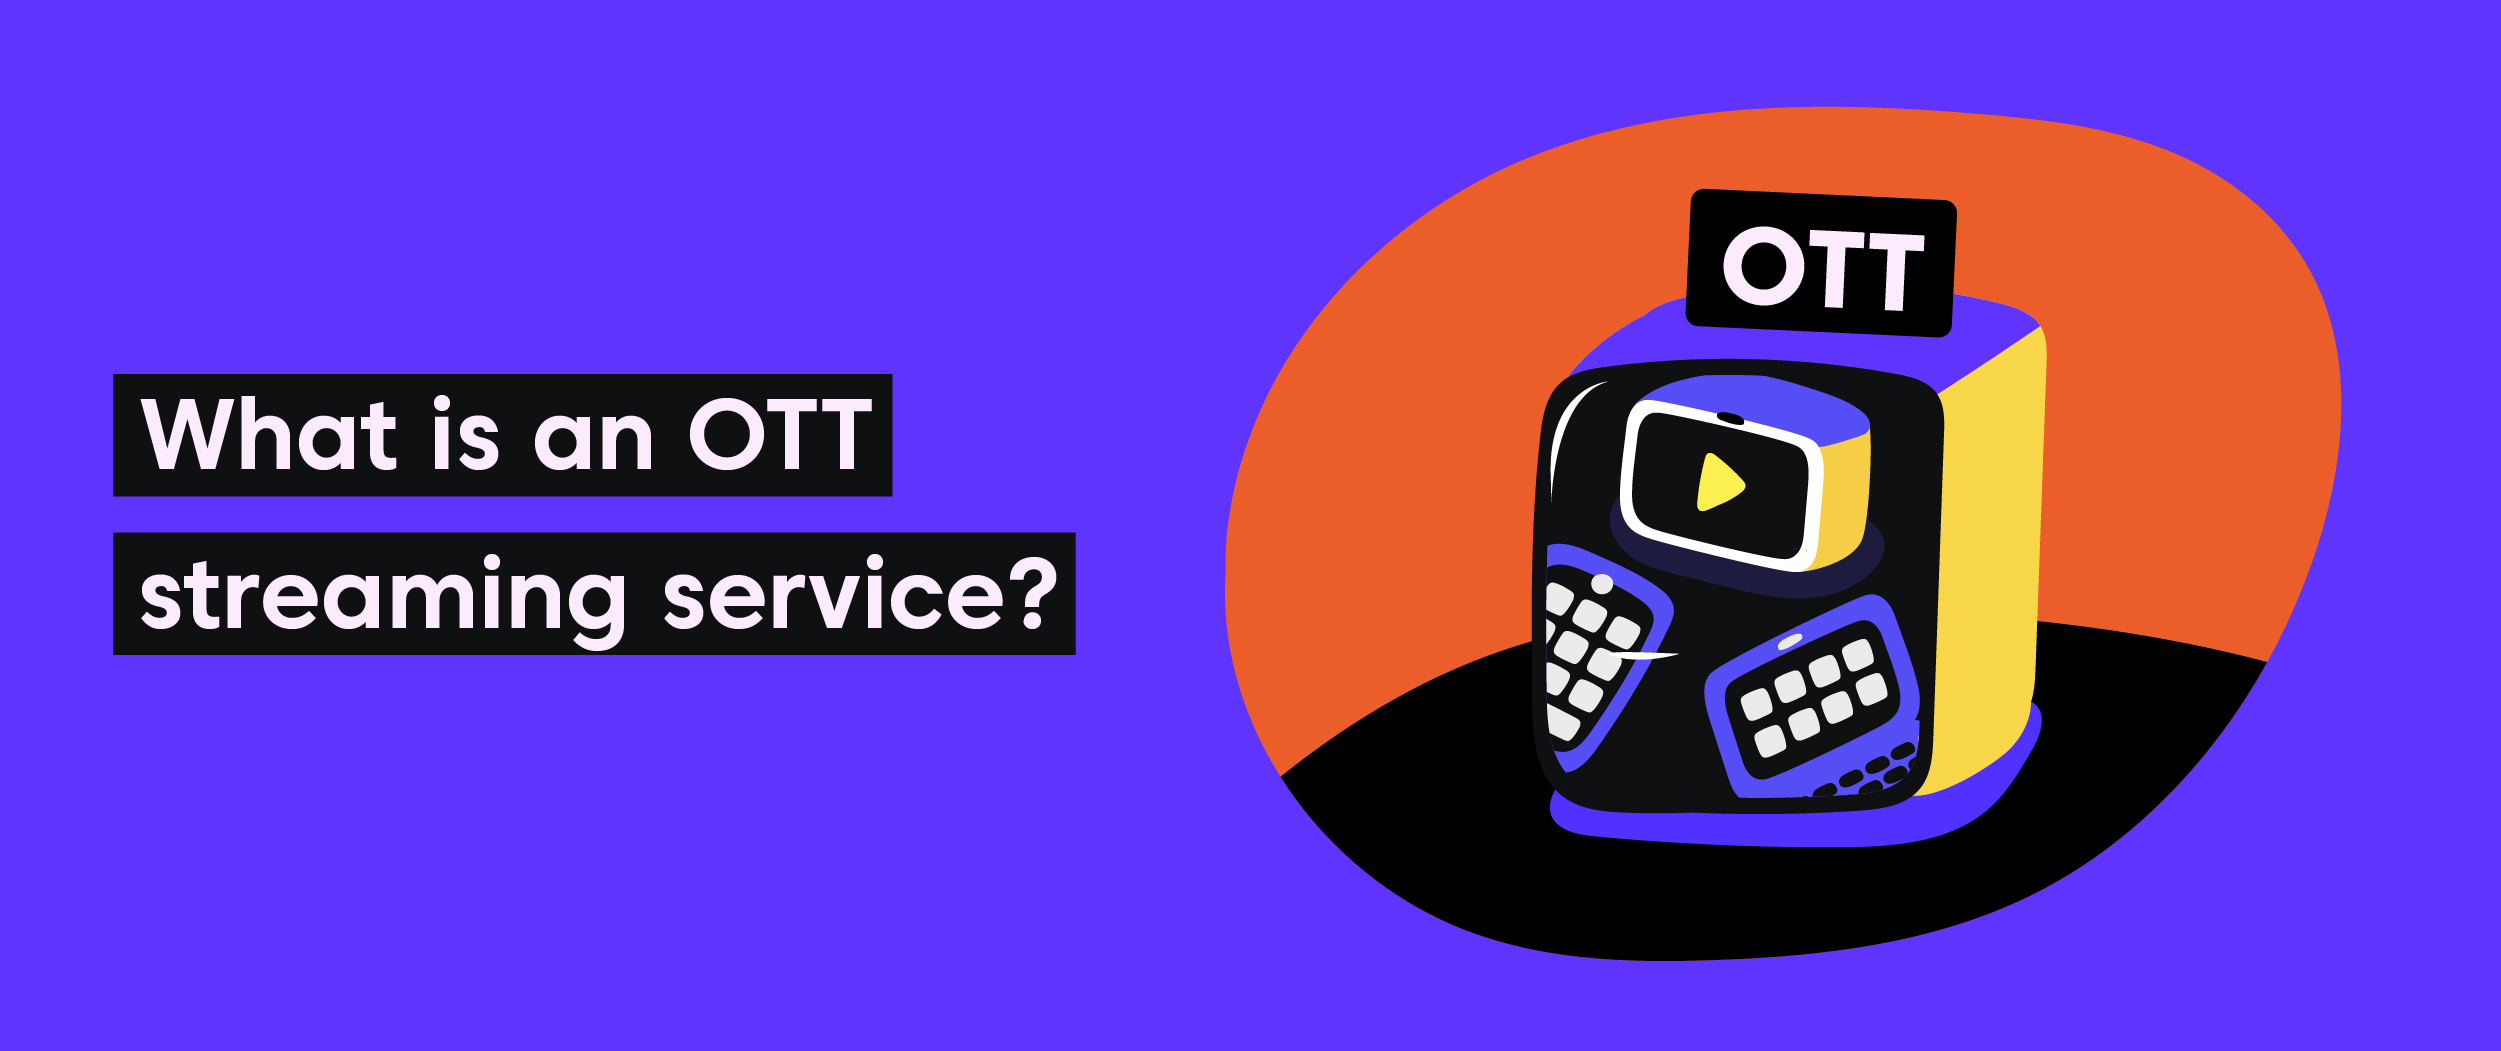 What is an OTT streaming service?